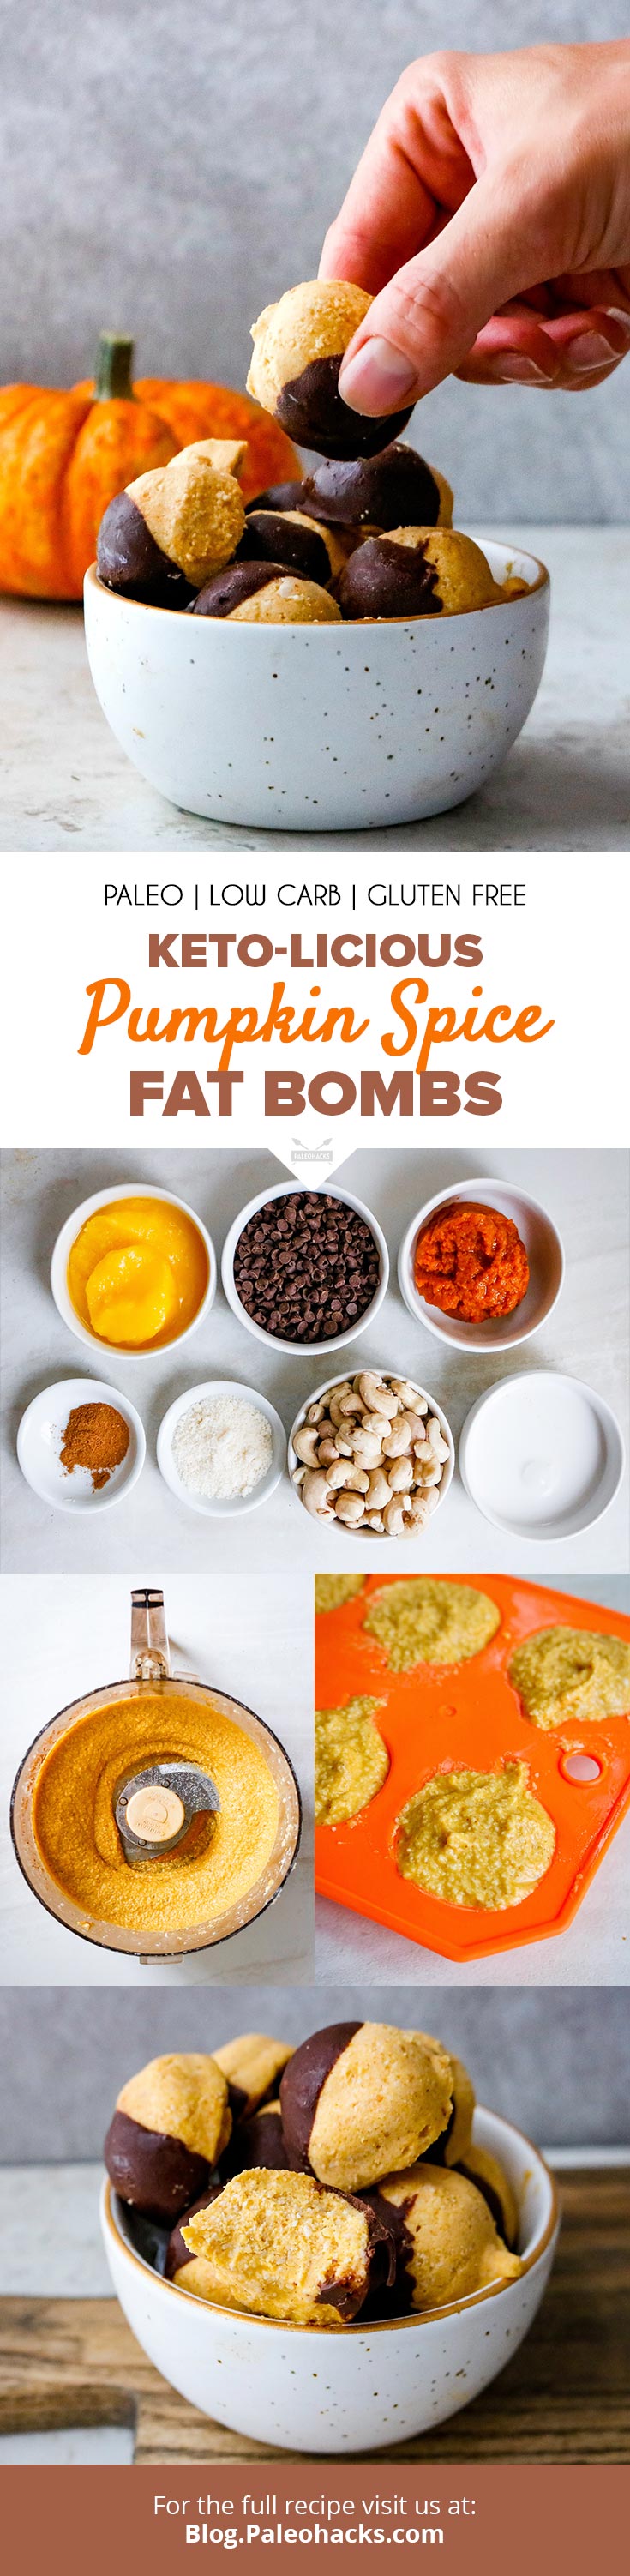 Kick sugar cravings to the curb with these keto-friendly fat bombs featuring pumpkin spice and dark chocolate. Grab one quick or they'll be gone before you can say boo!